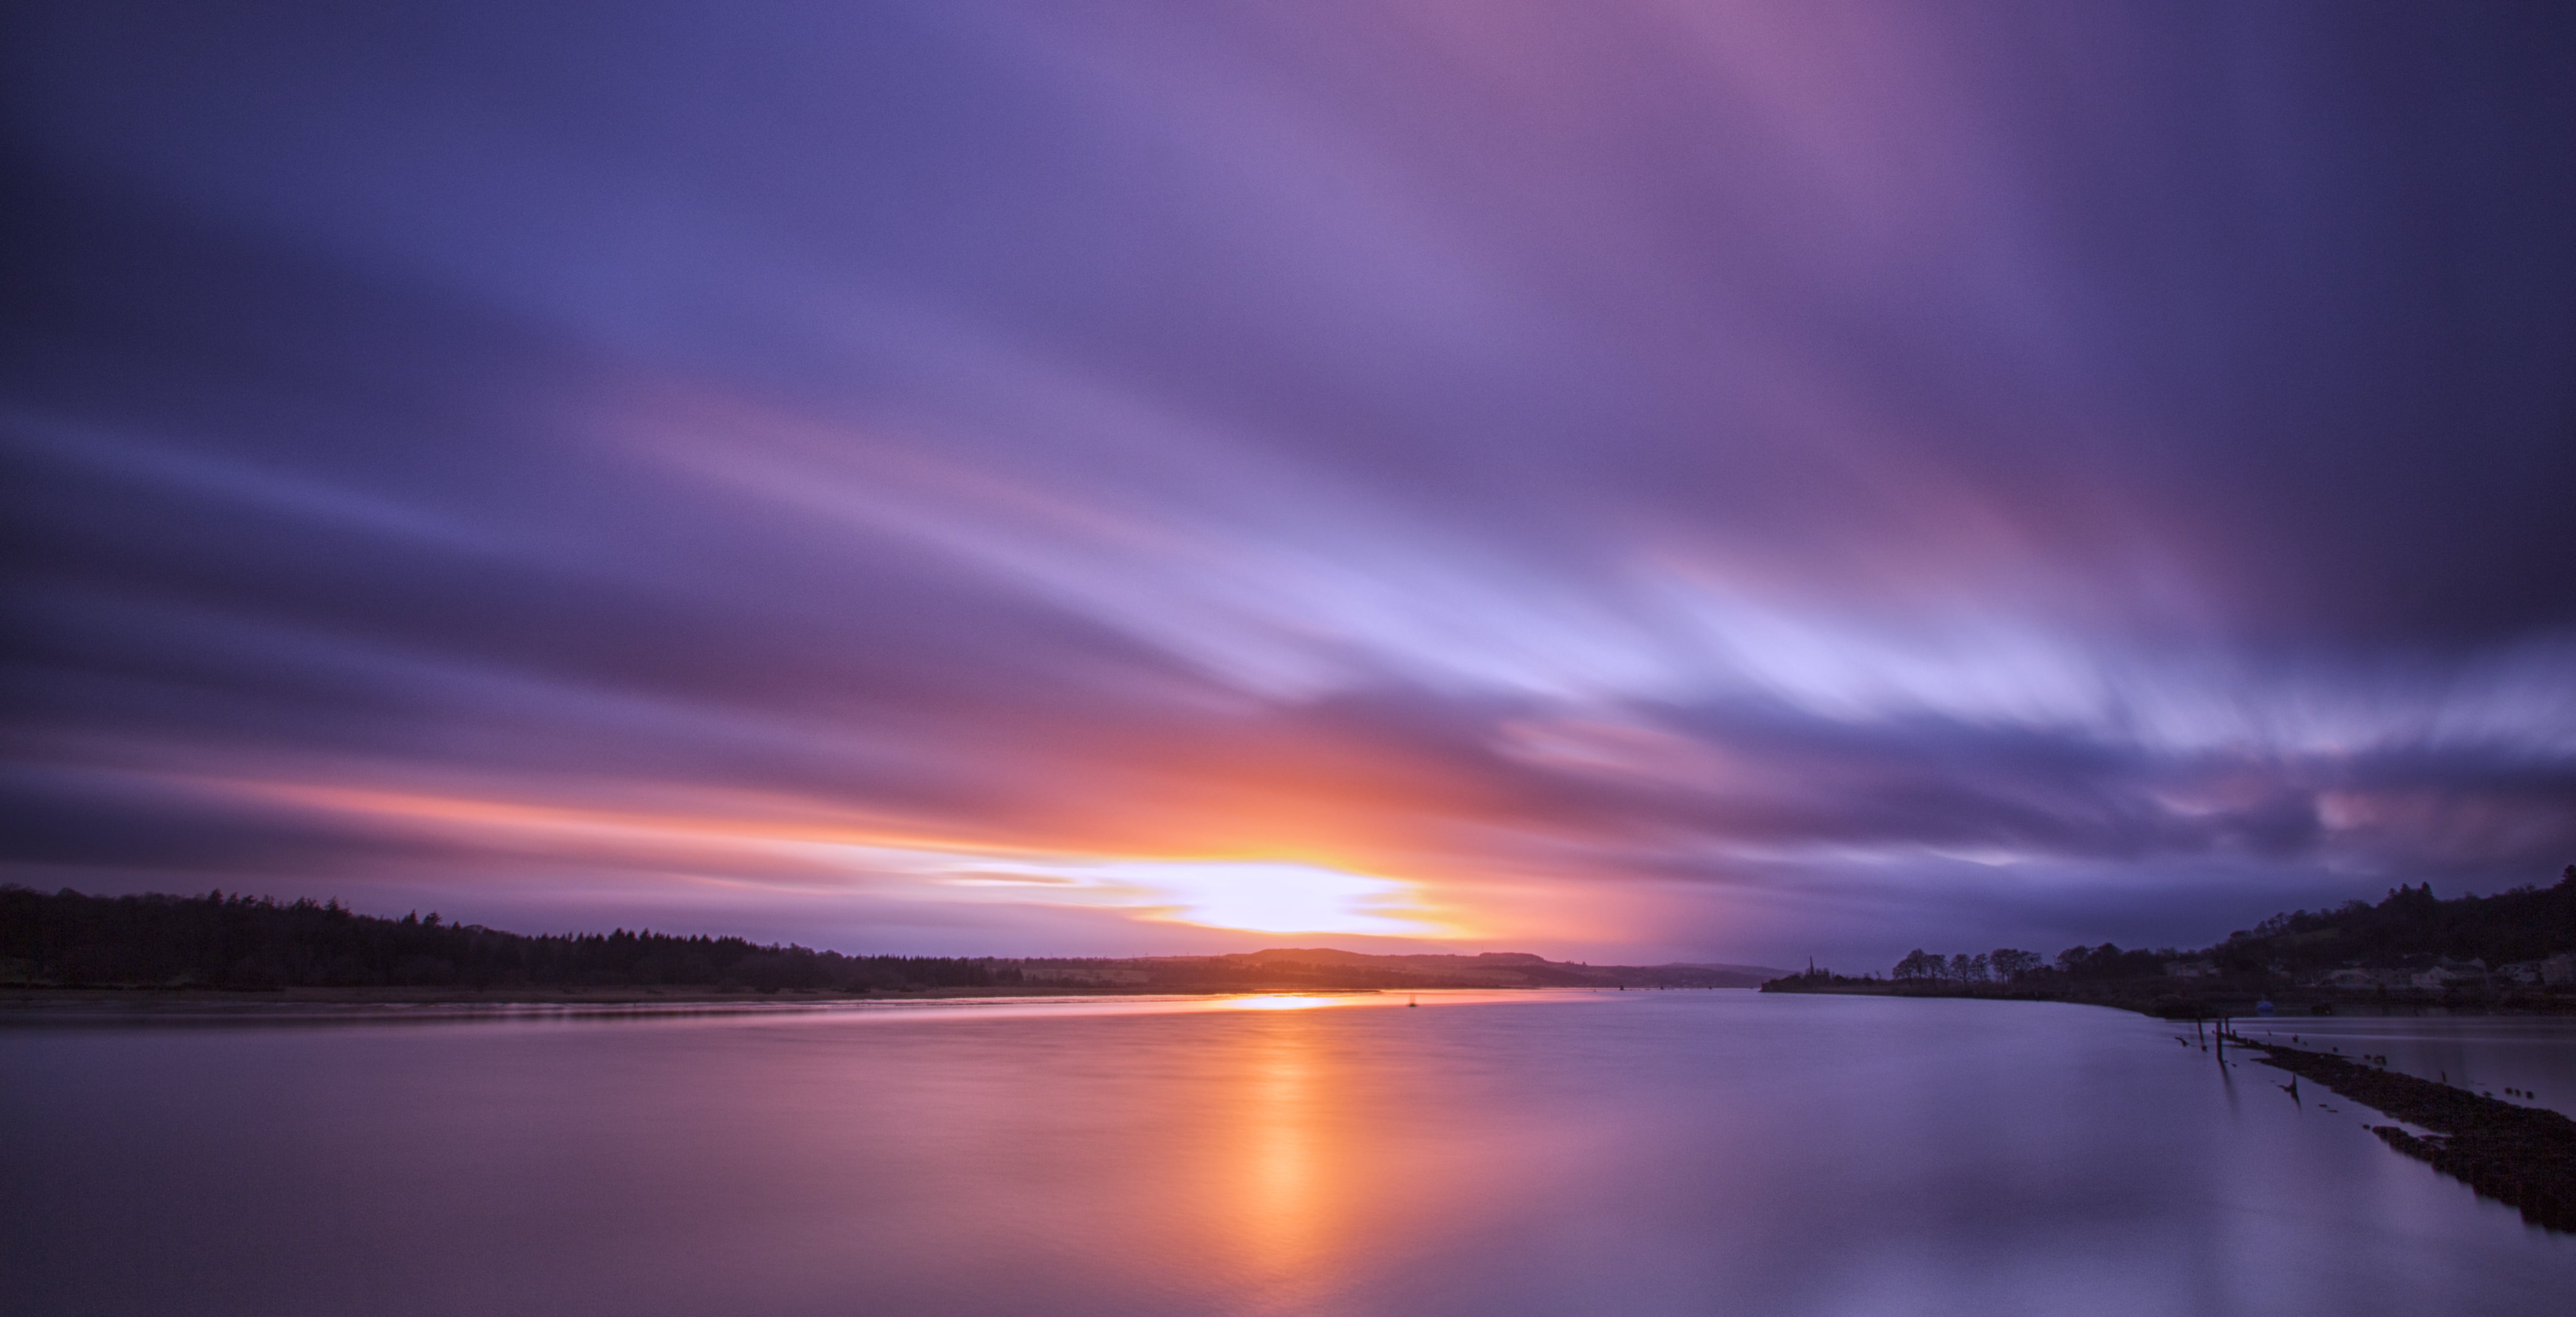 body of water during purple sunset, River Clyde, Scotland, long exposure